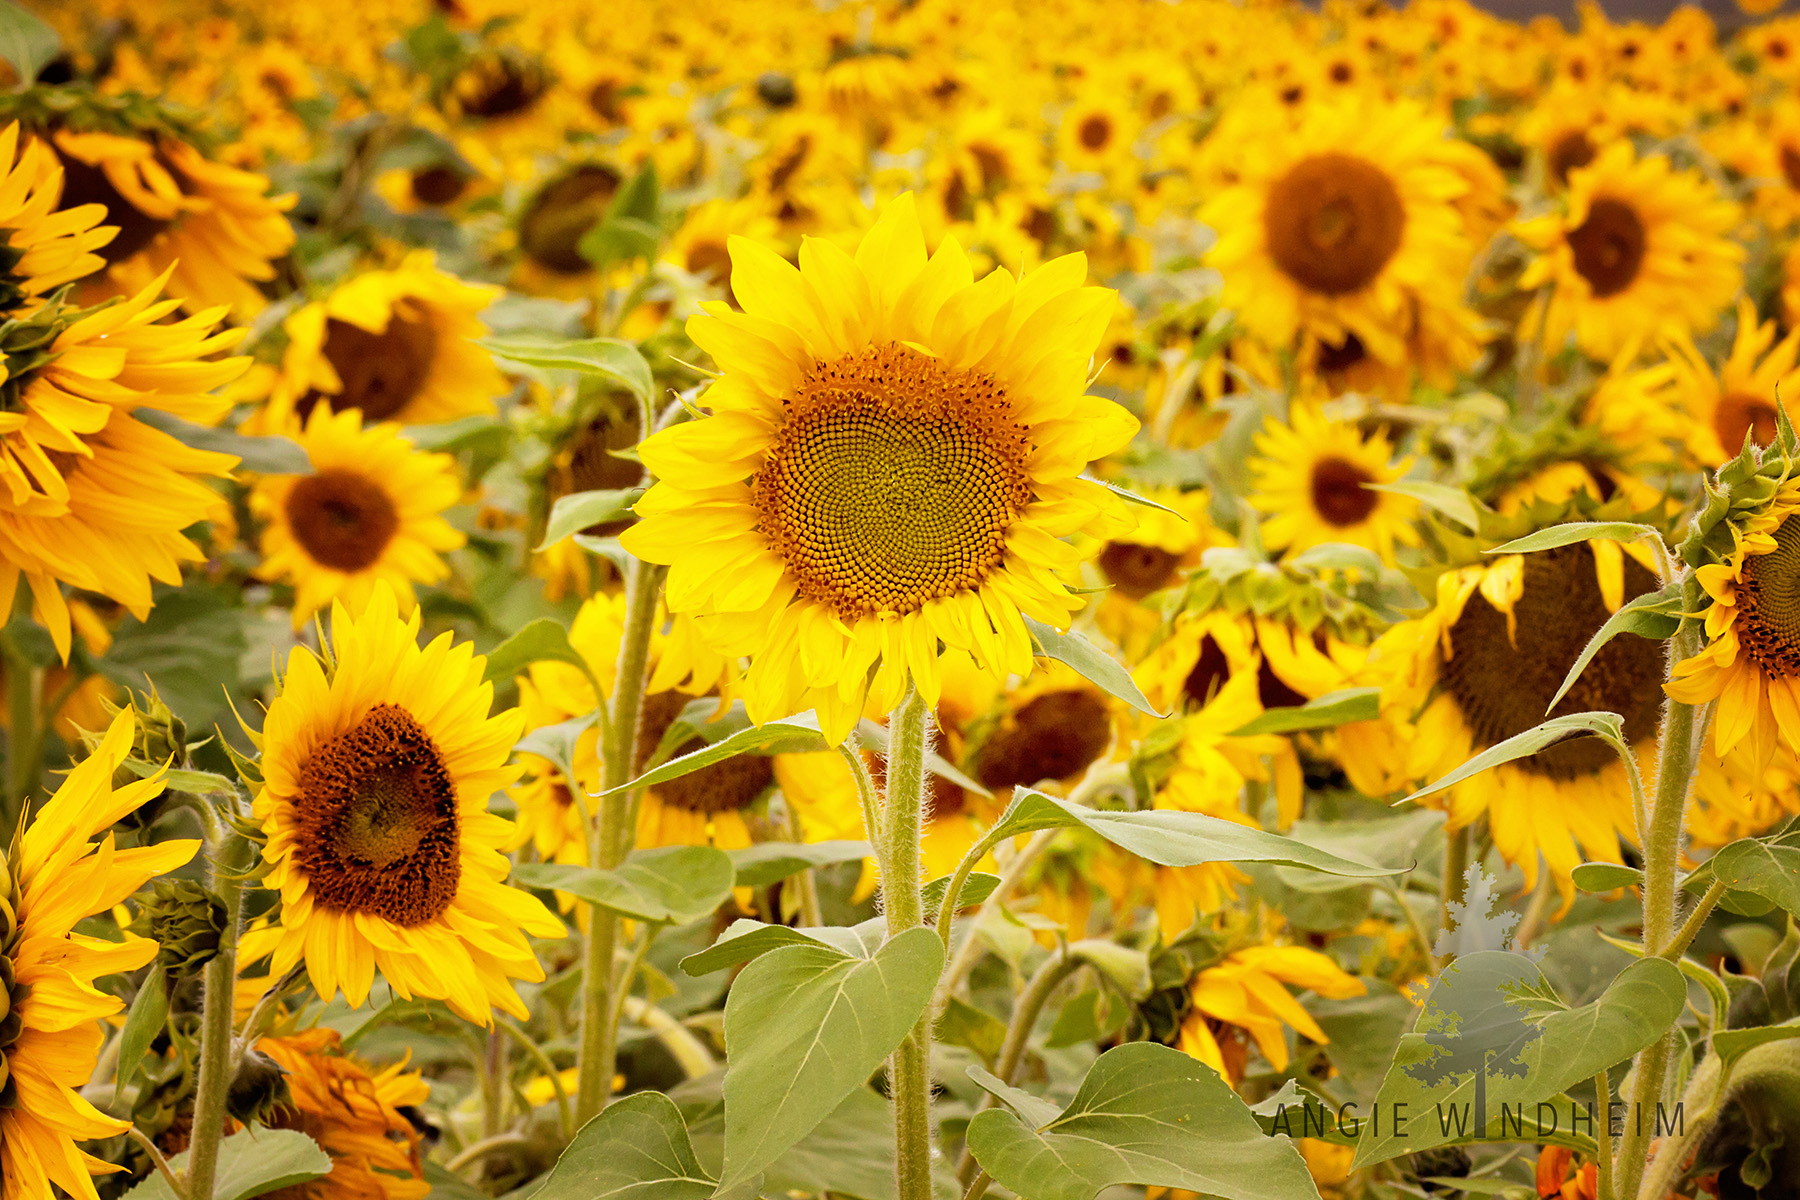 Photo of a sunflower in the middle of a sunflower field.